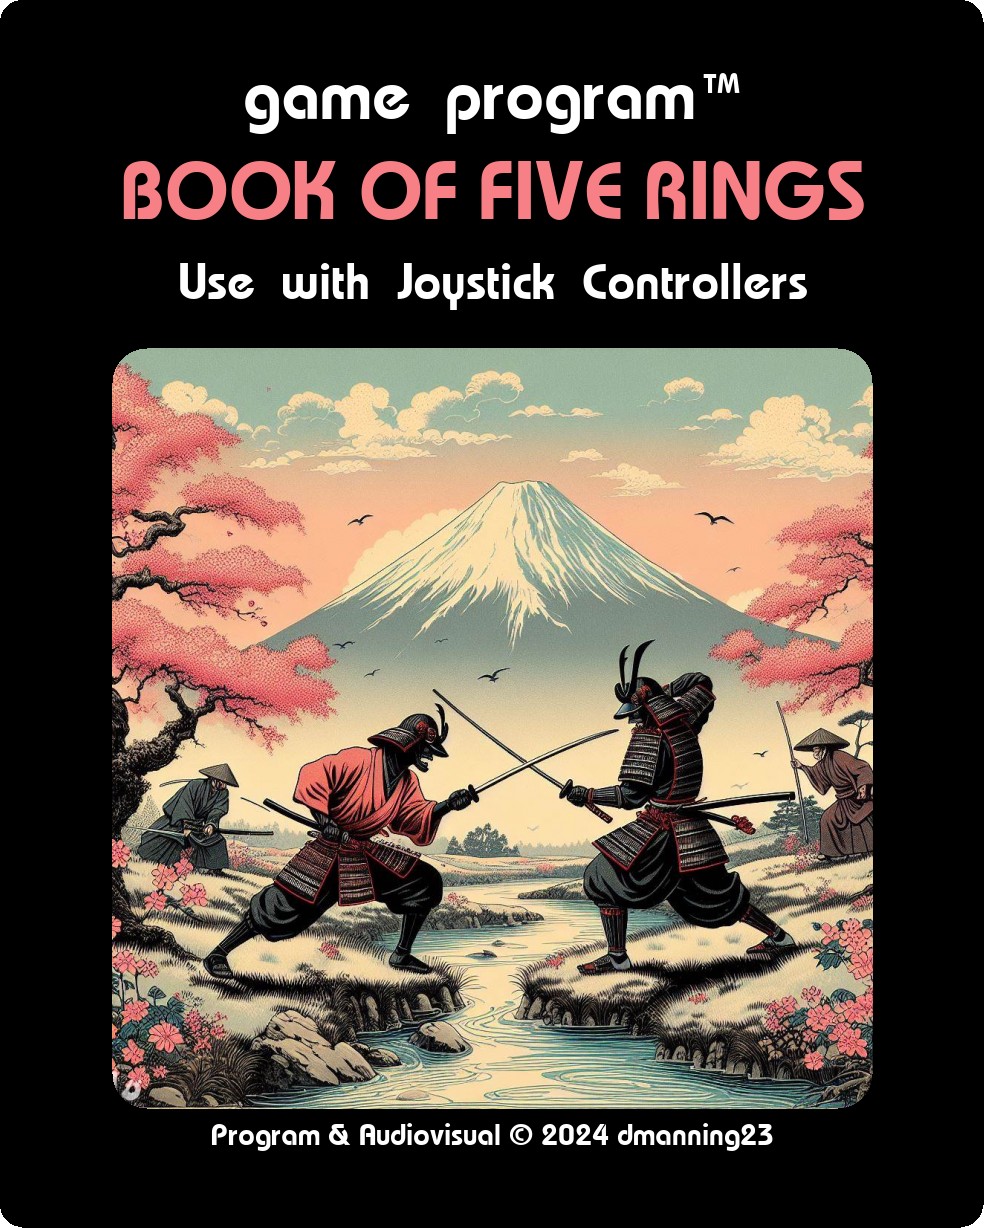 - A promotional image for Book of Five Rings